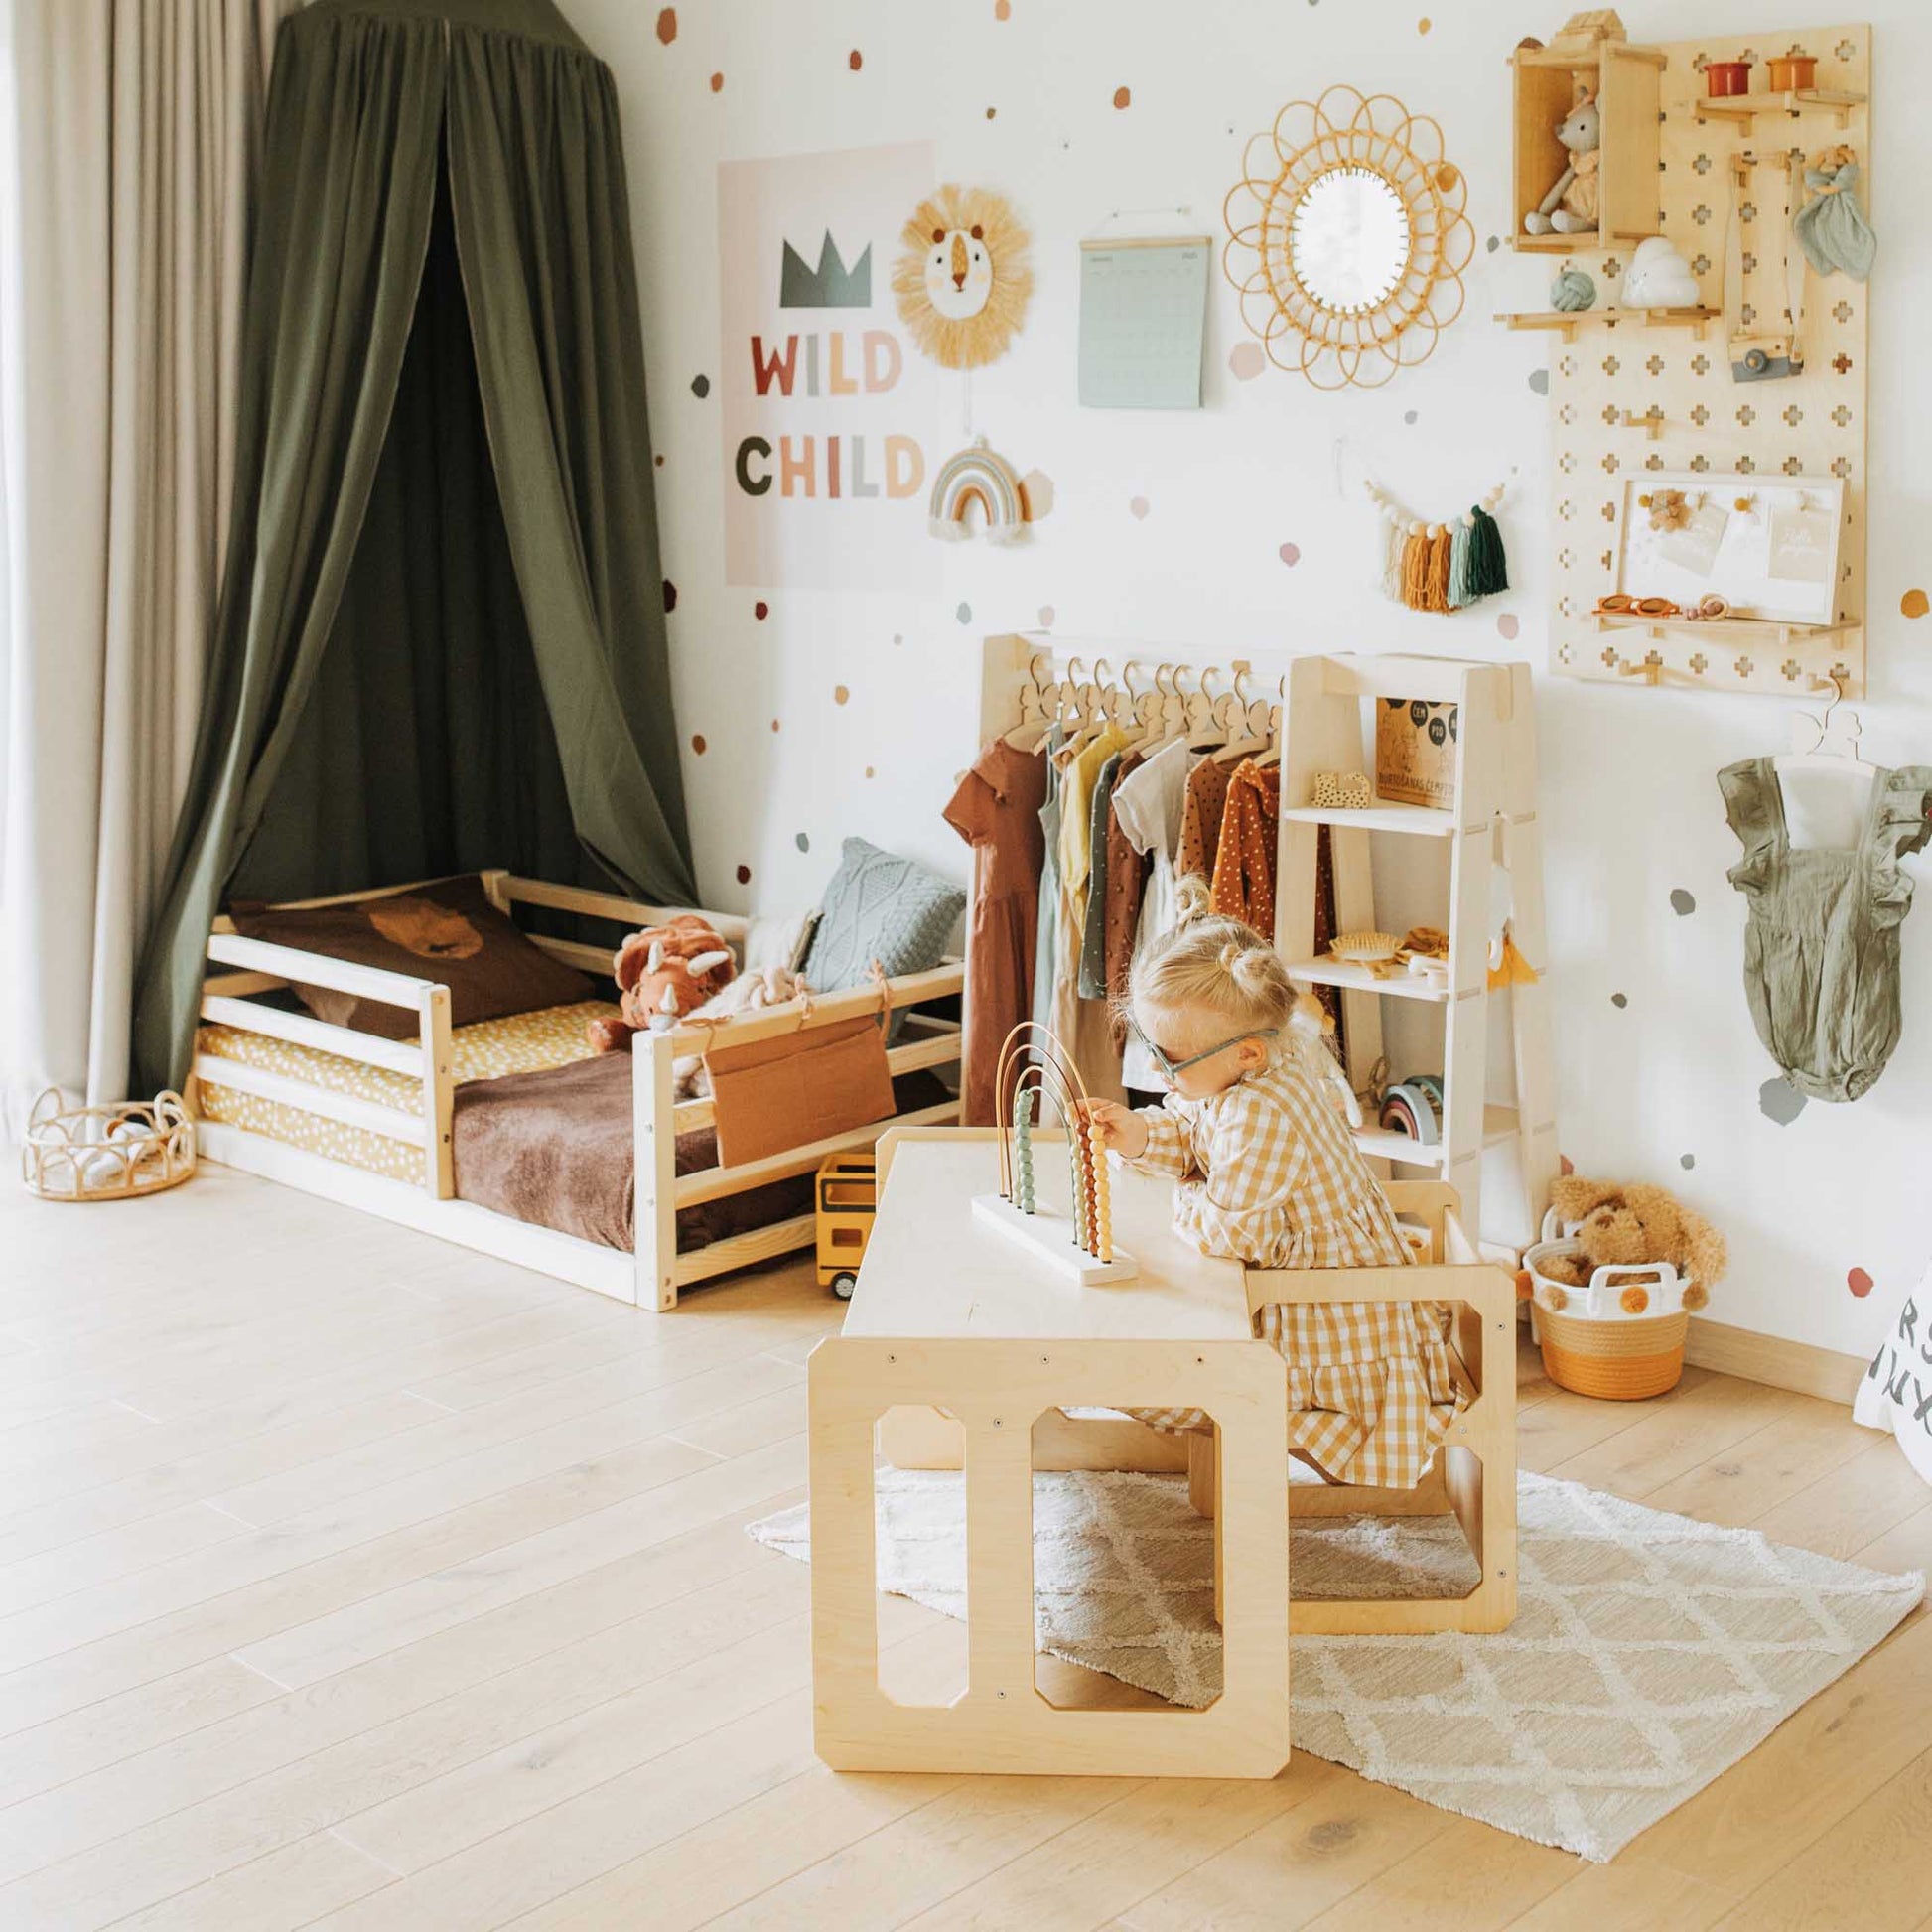 A Sweet Home From Wood Montessori weaning table and chair set child's room with a wooden desk and polka dot walls.